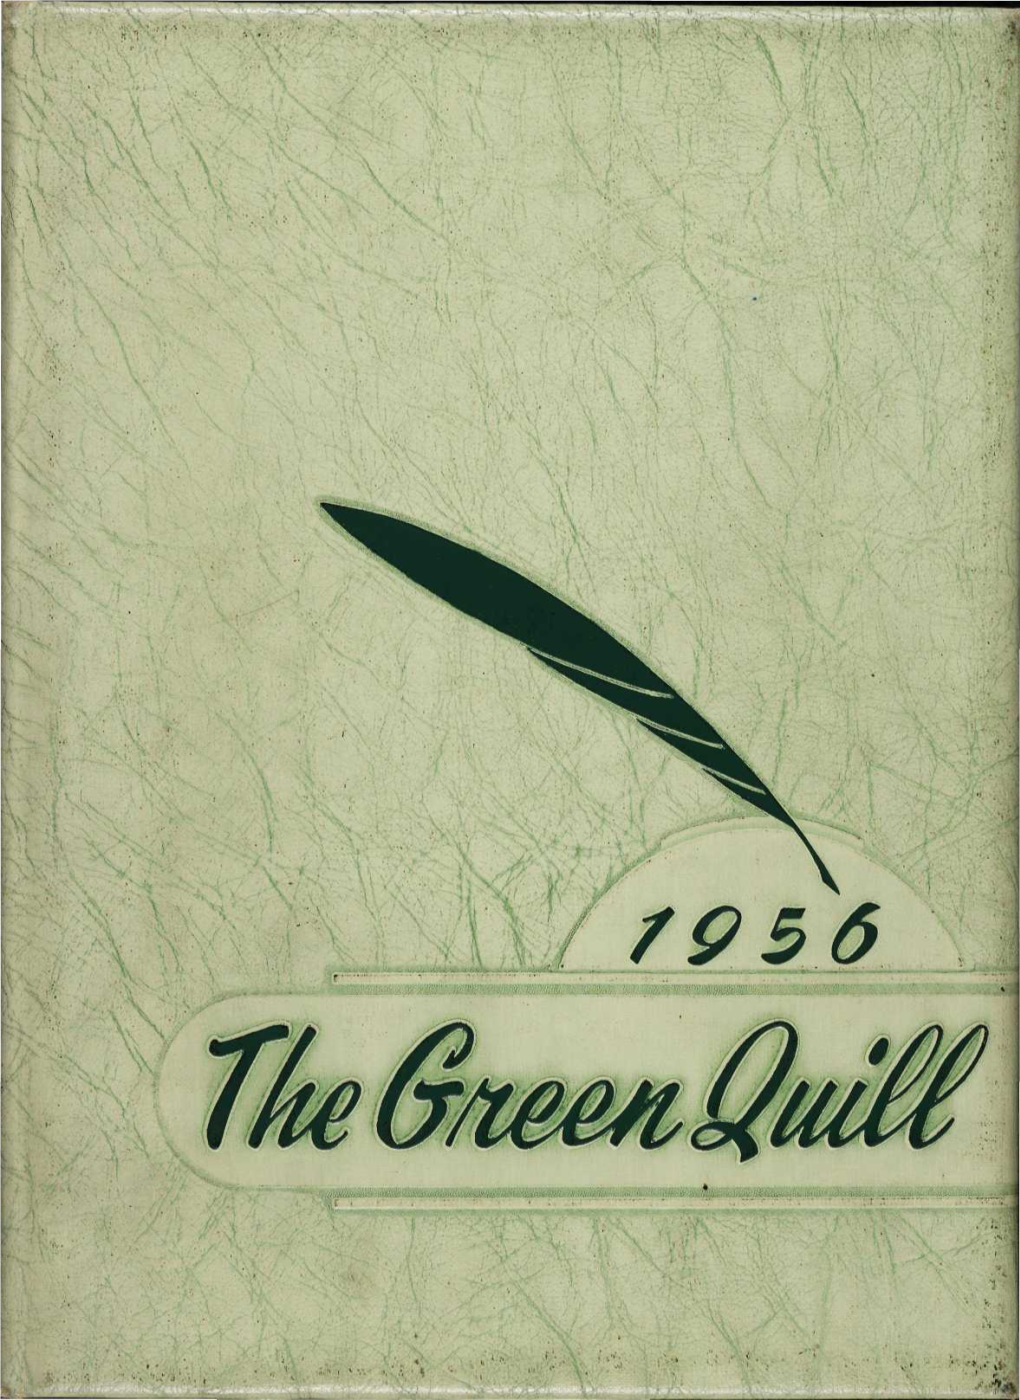 The Green Quill